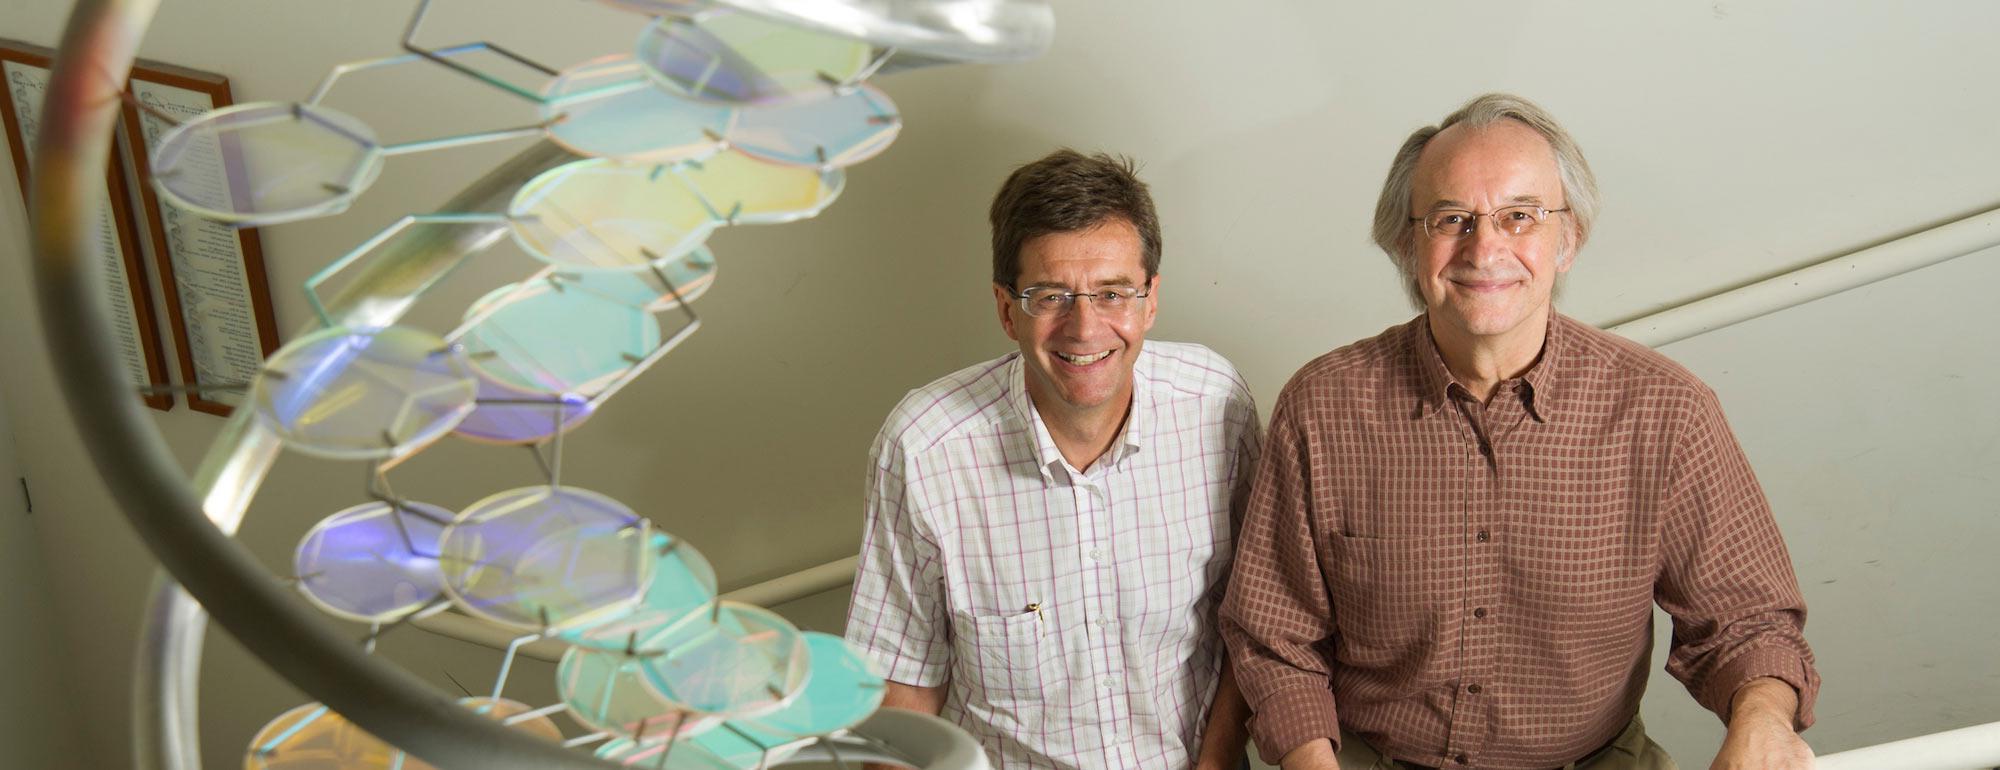 Two UC Davis proffessors pose next to a large DNA model in the UC Davis Life Sciences building